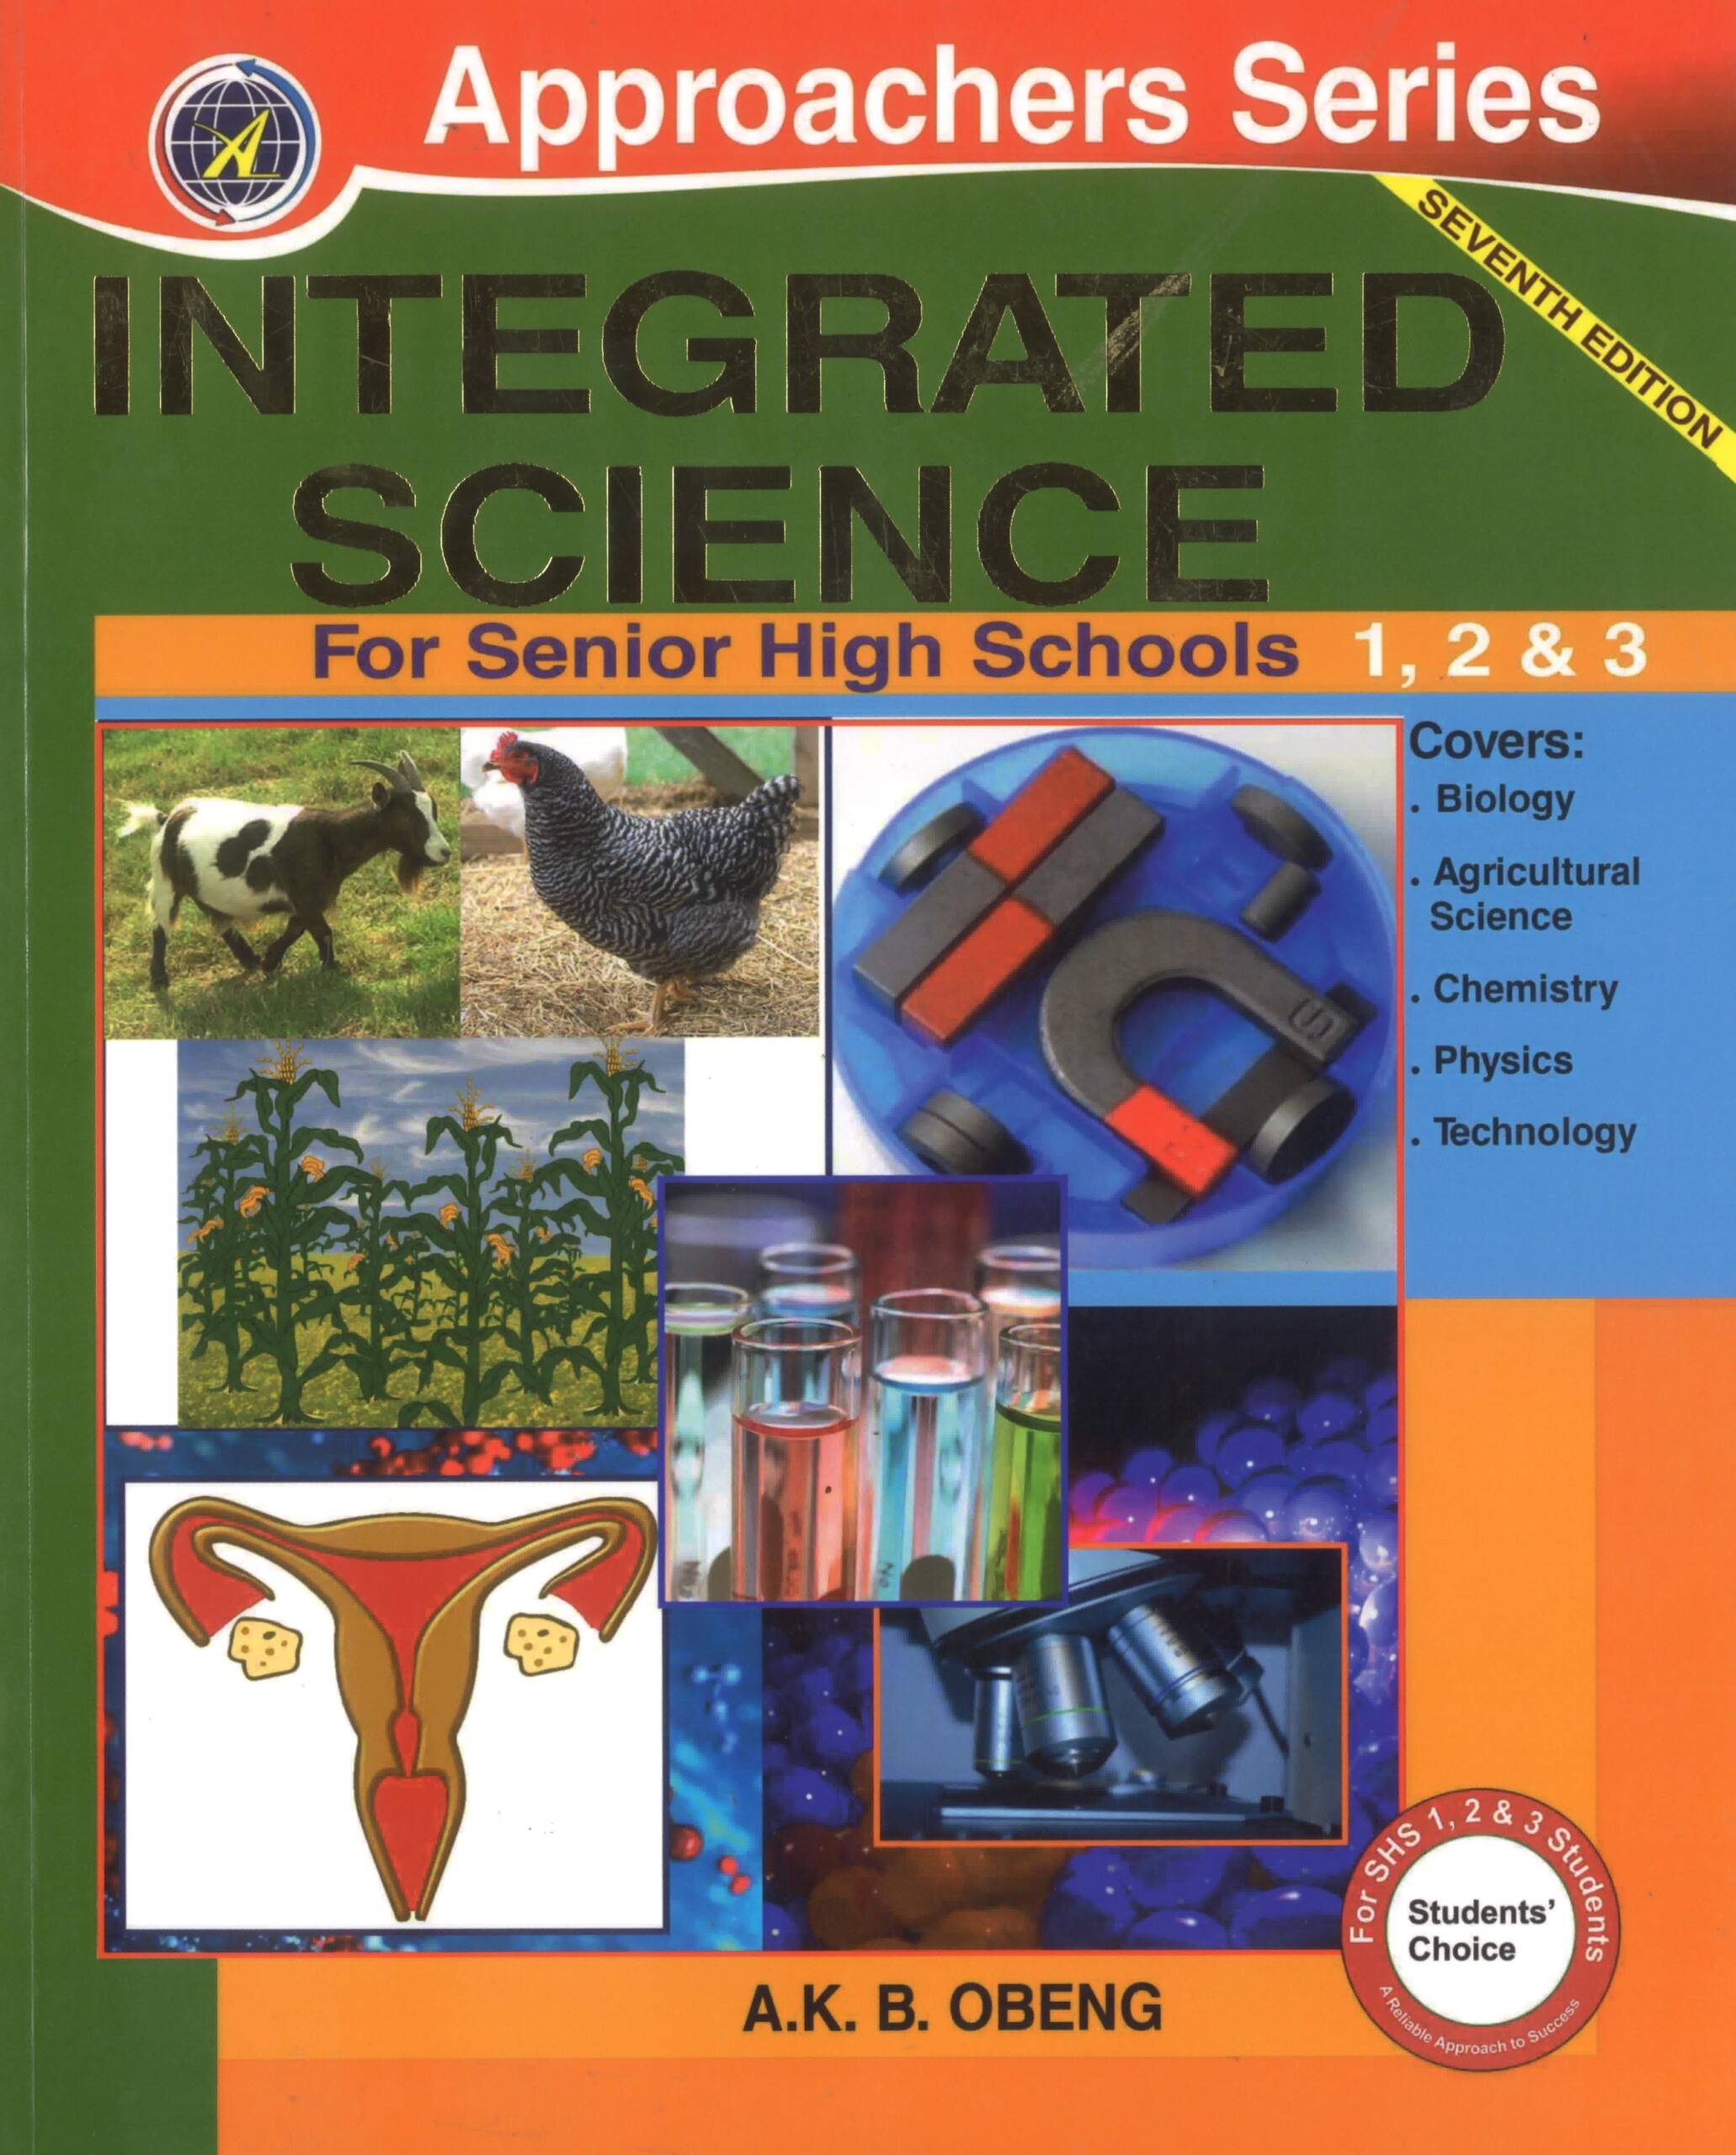 research topics on integrated science education